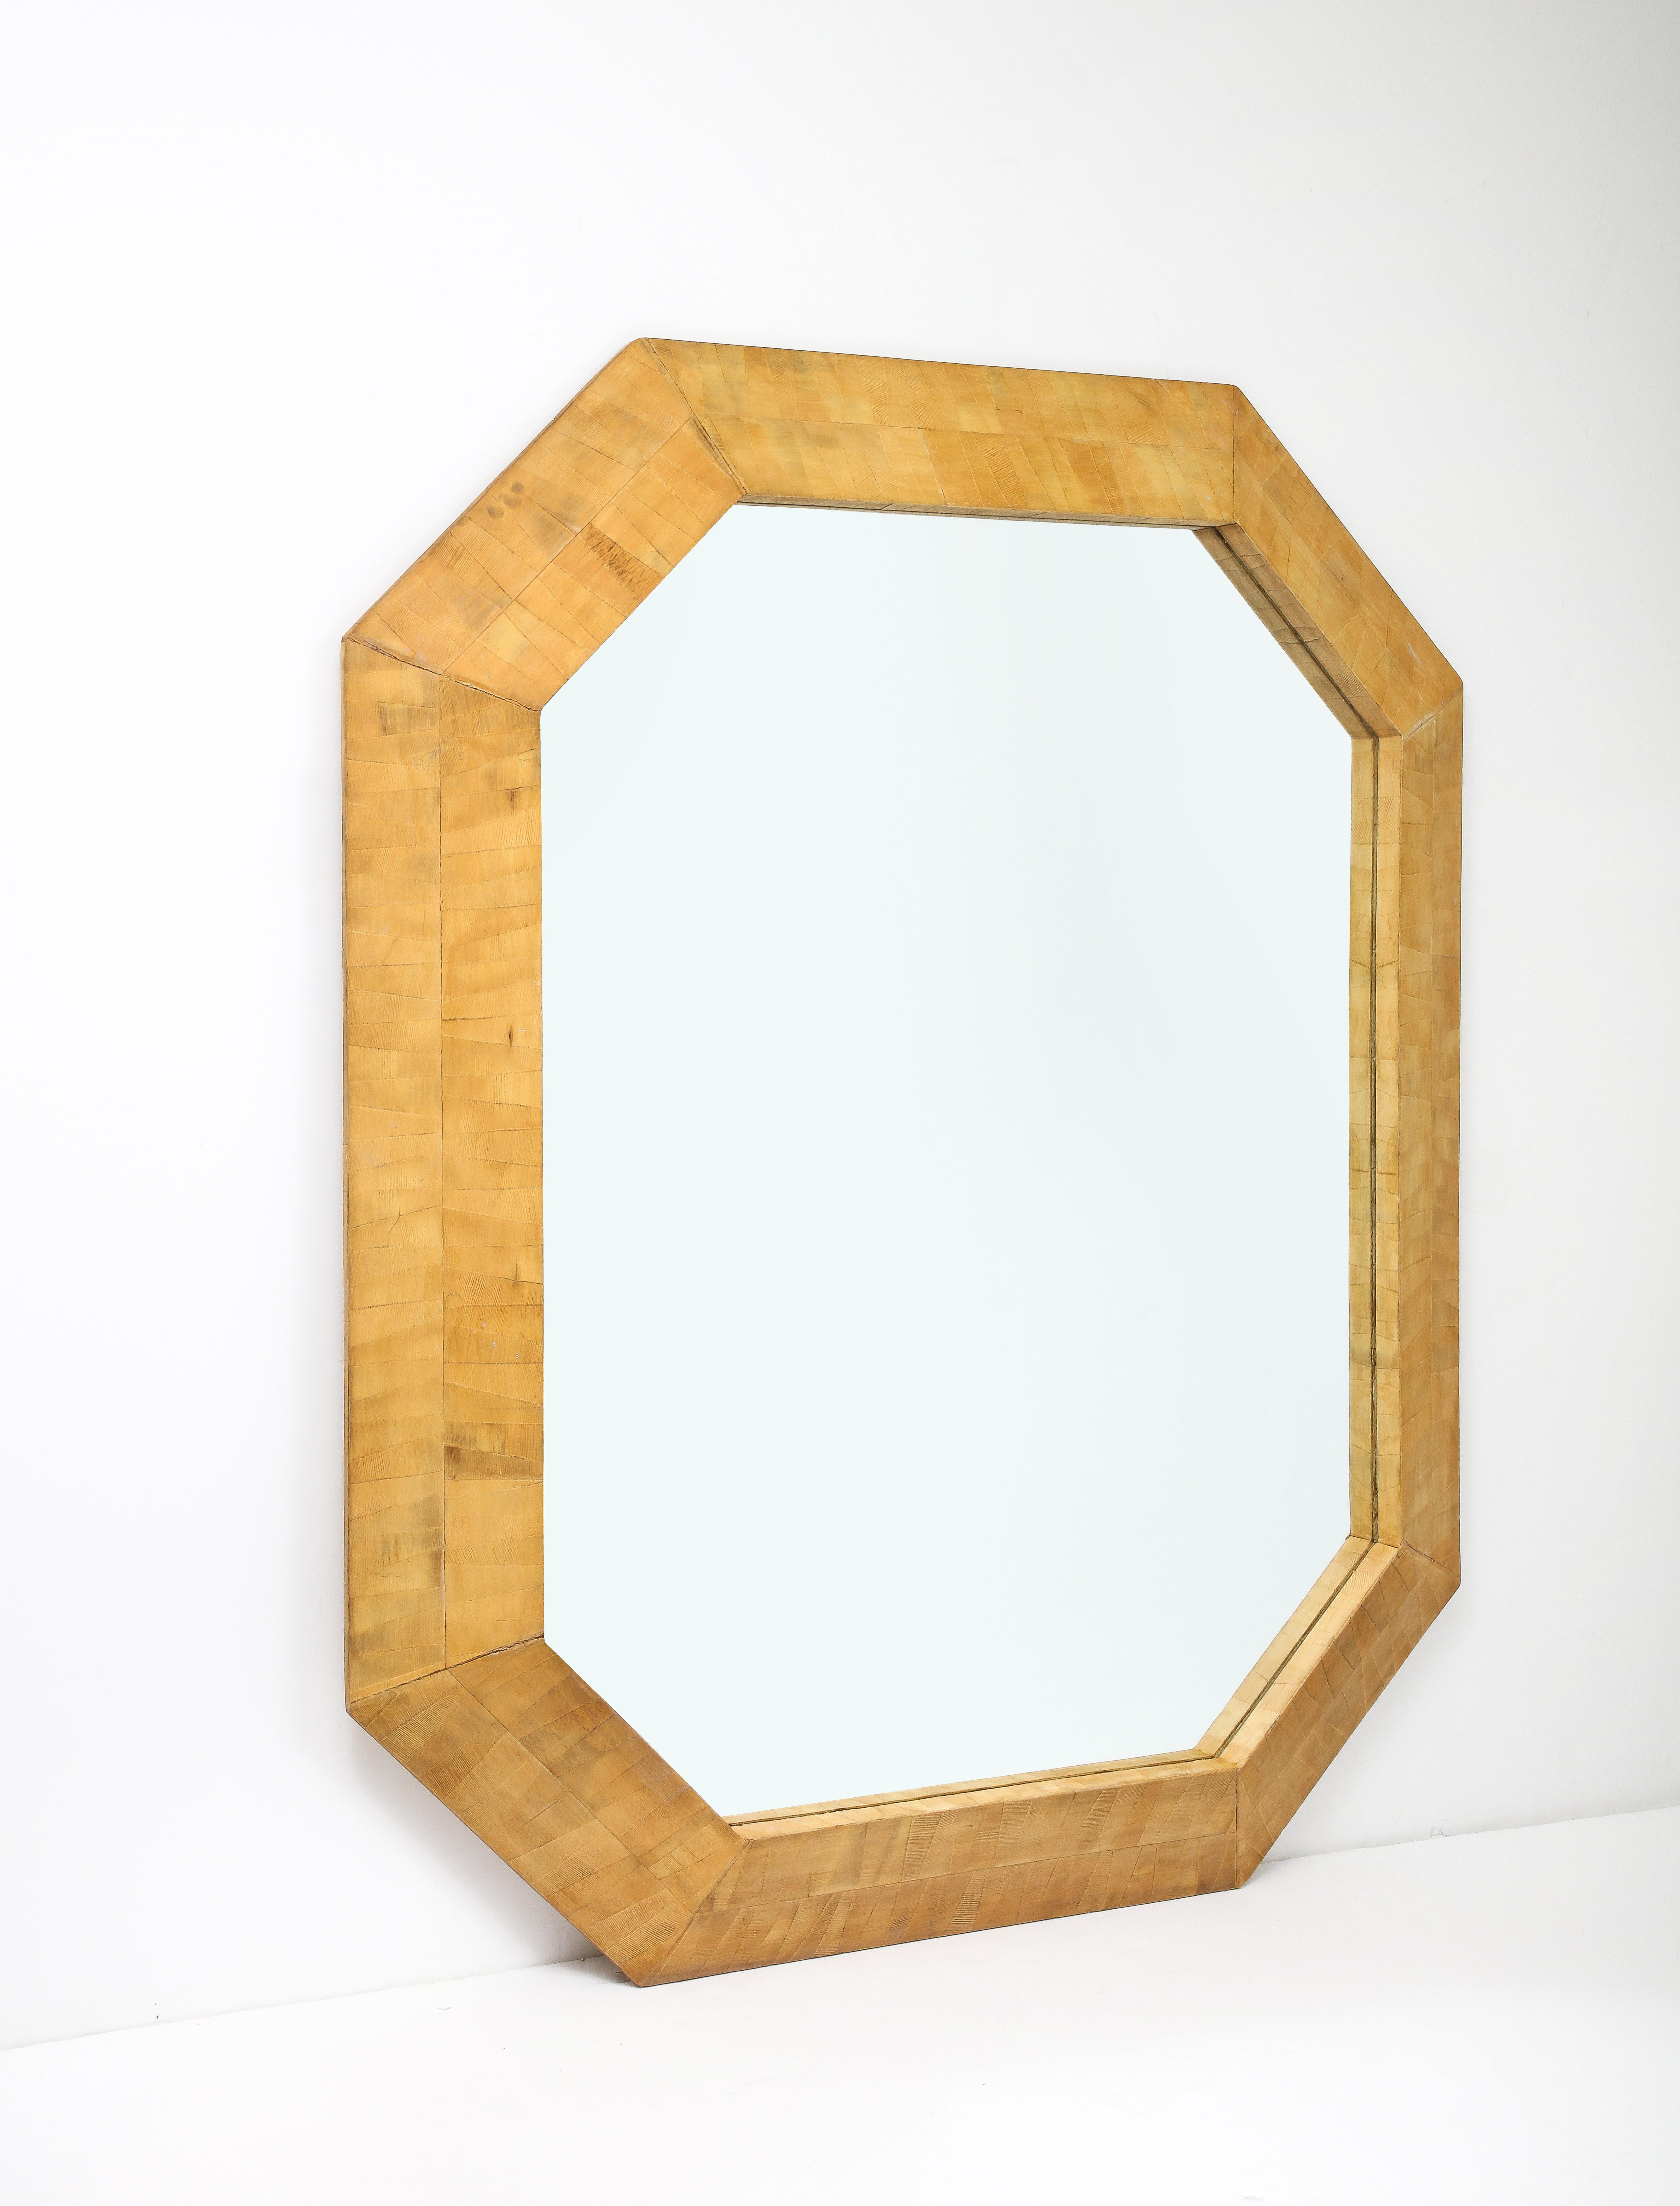 Monumental Wooden Parquetry framed mirror with a beautiful natural aged Honey patina.
The mirror can be hung either Horizontally or Vertically.